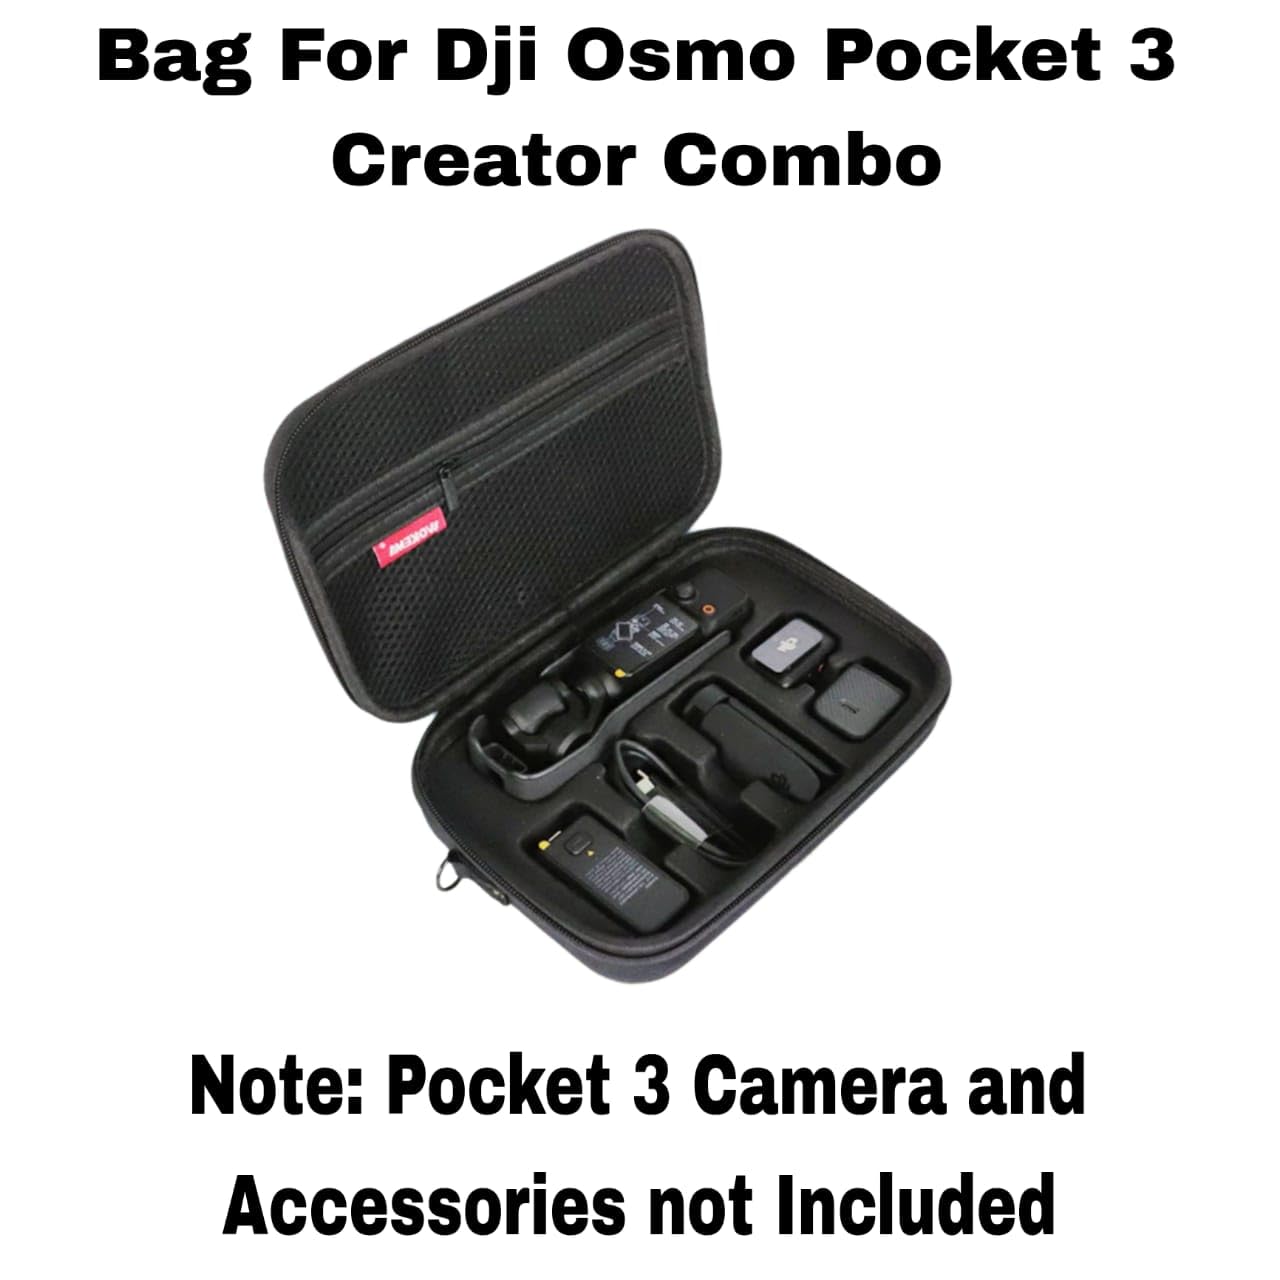 Carrying Case Bag for DJI Osmo Pocket 3 & Accessories Storage Waterproof Travel Luggage case